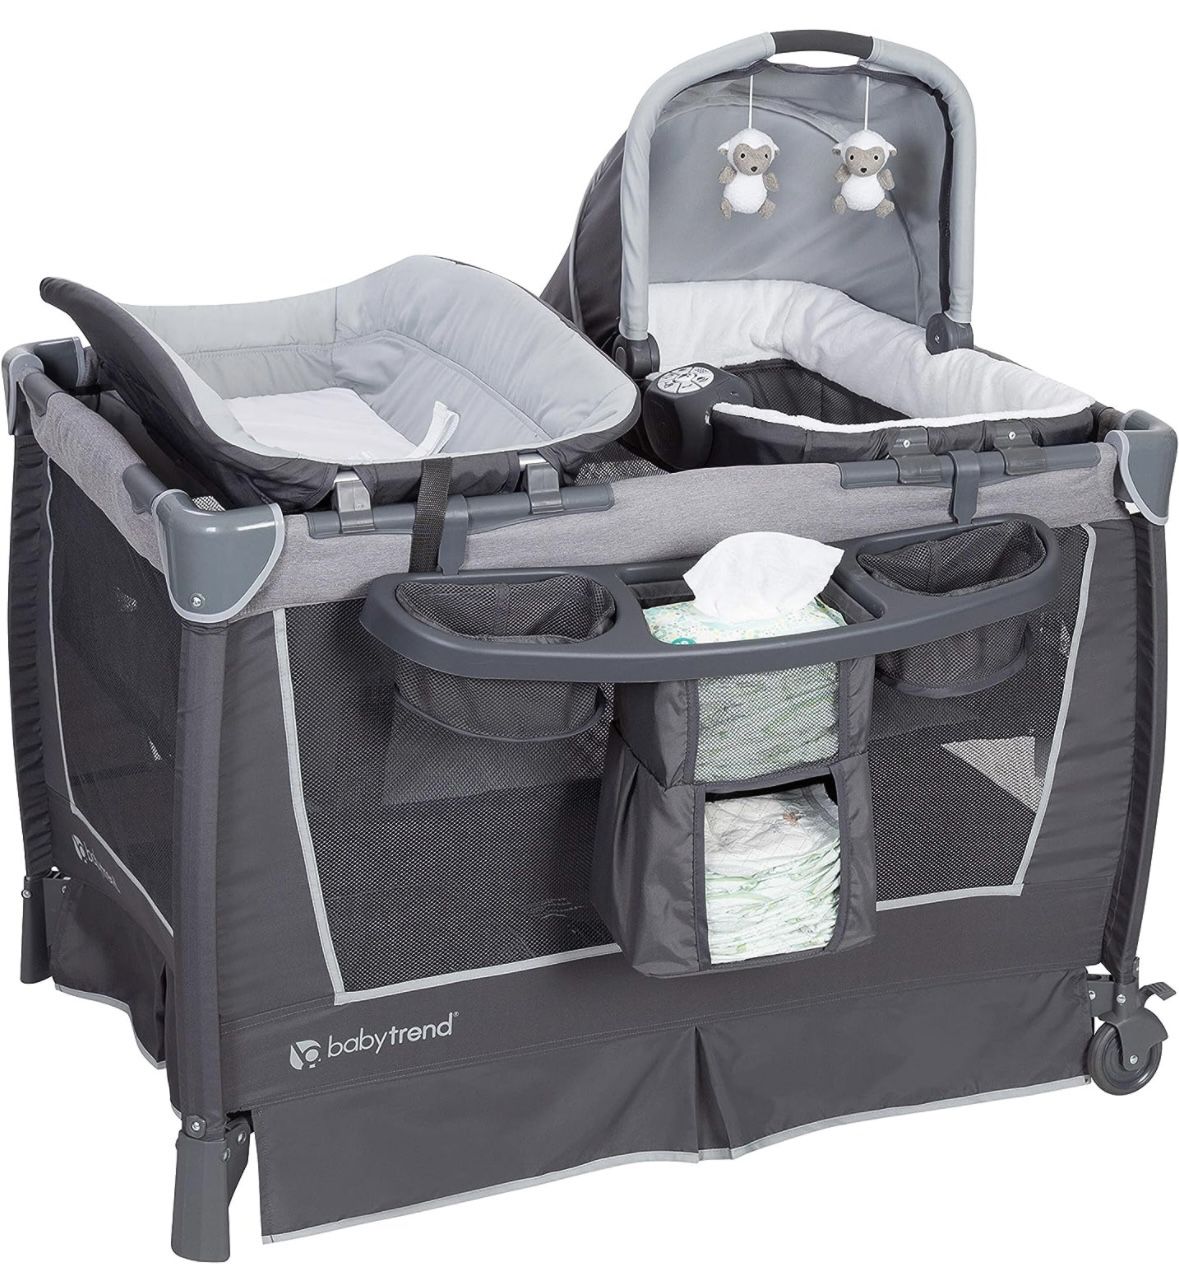 Baby Trend Convertible Bassenet ———Free To Single Fathers With Custody Of His Child(s)———